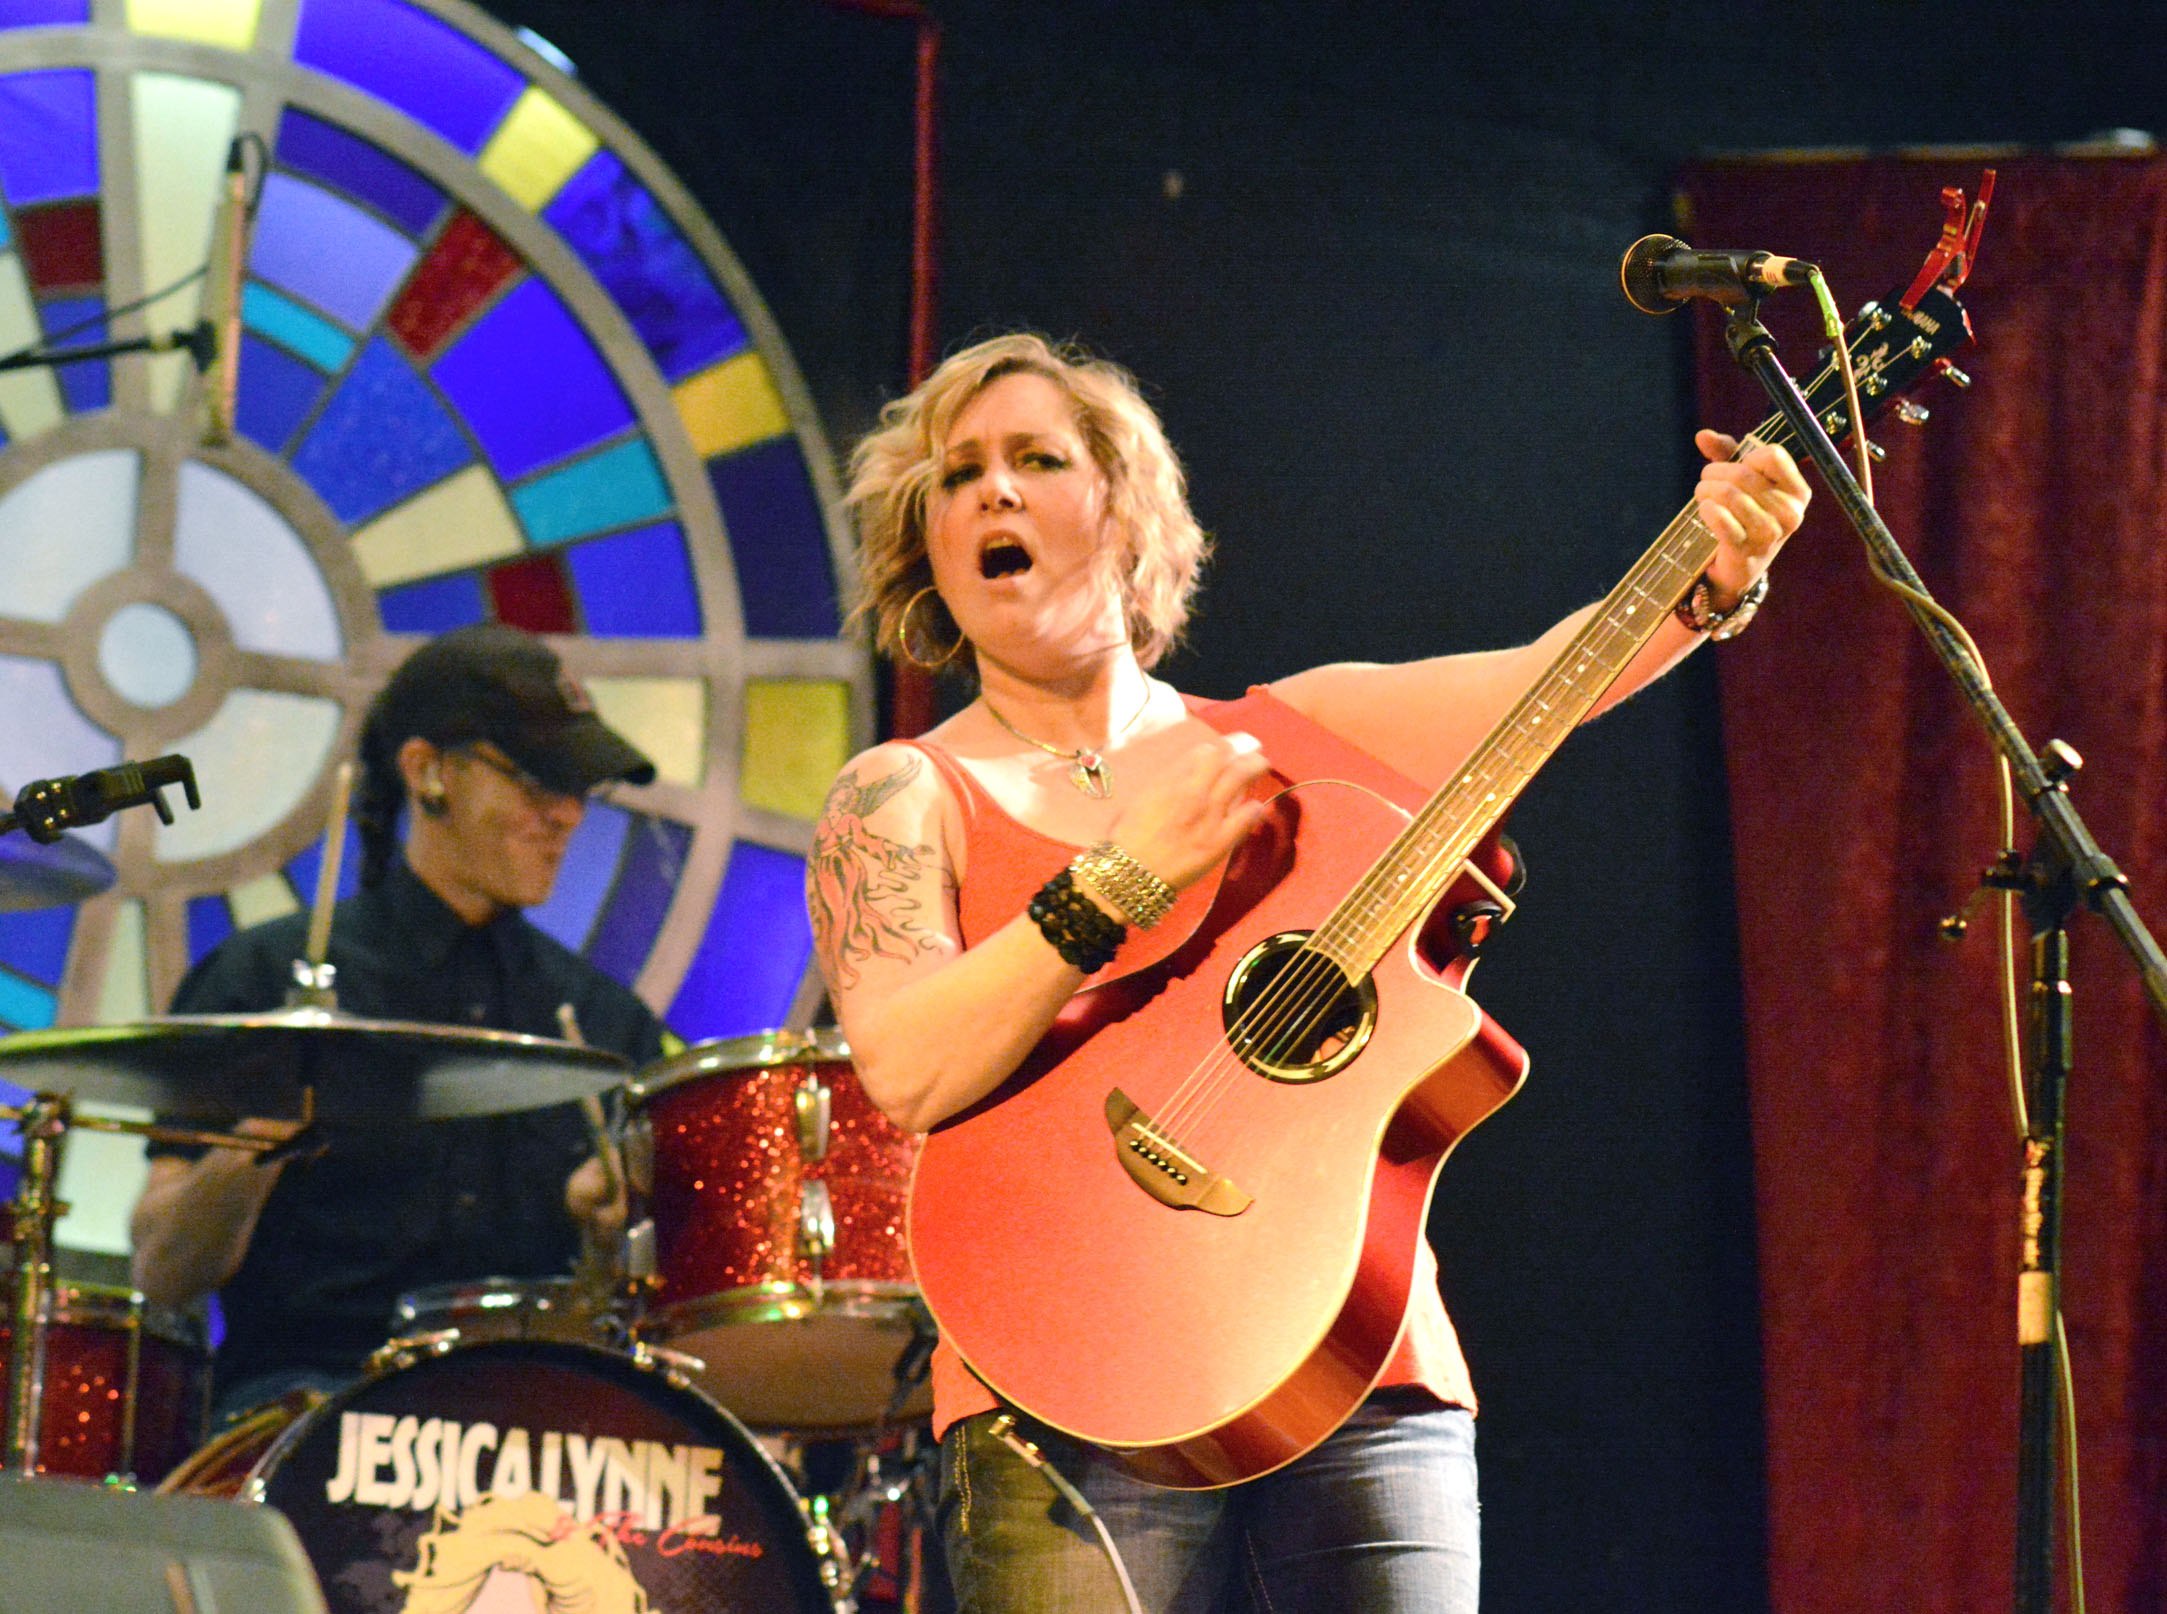 Seattle-based country singer Jessica Lynne returns to the Metta Room in Port Angeles on Saturday night. (Photo by Diane Urbani de la Paz/Peninsula Daily News)